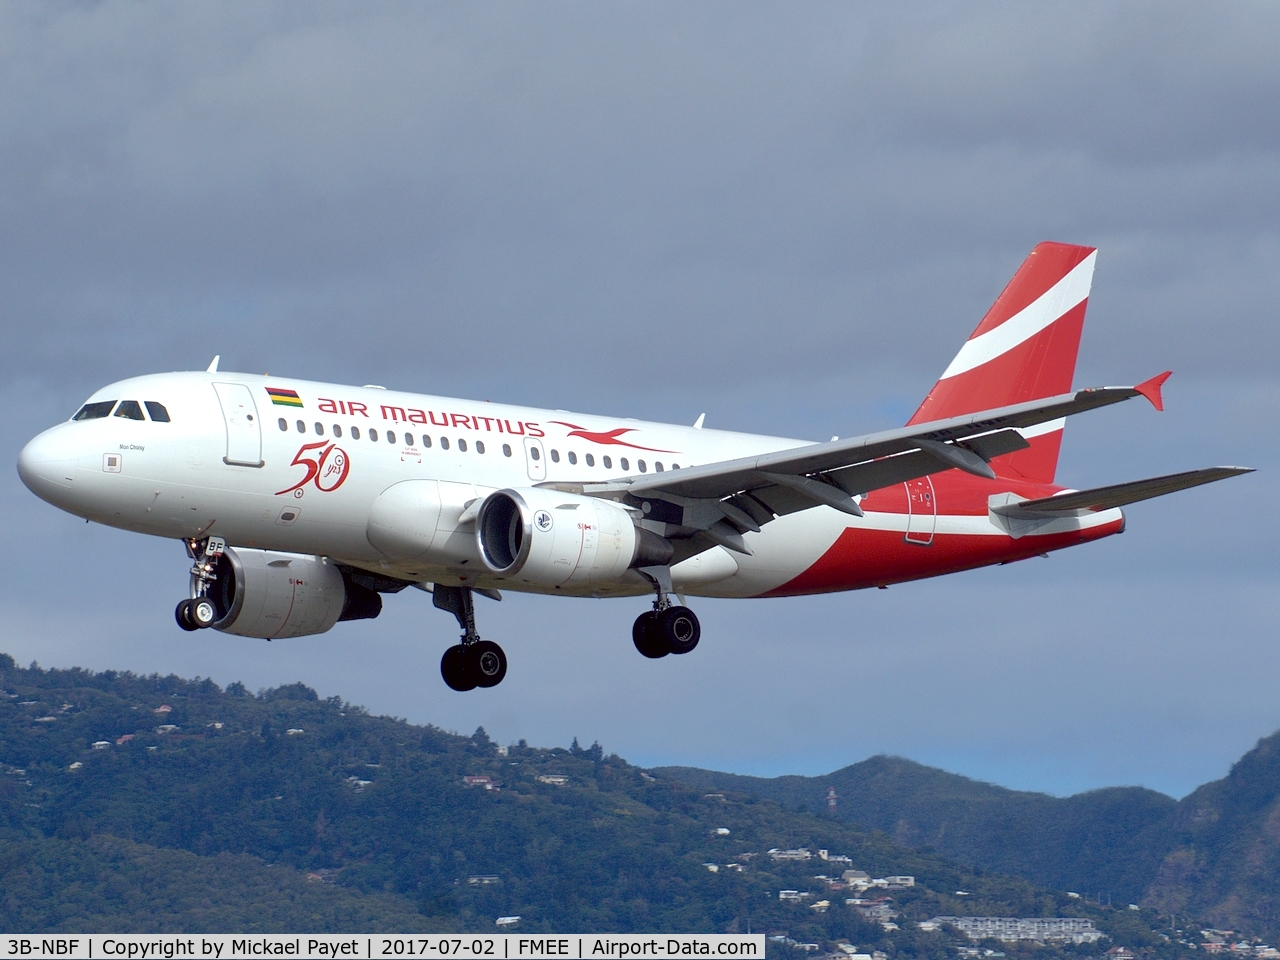 3B-NBF, 2001 Airbus A319-112 C/N 1592, With '50 yrs' stickers